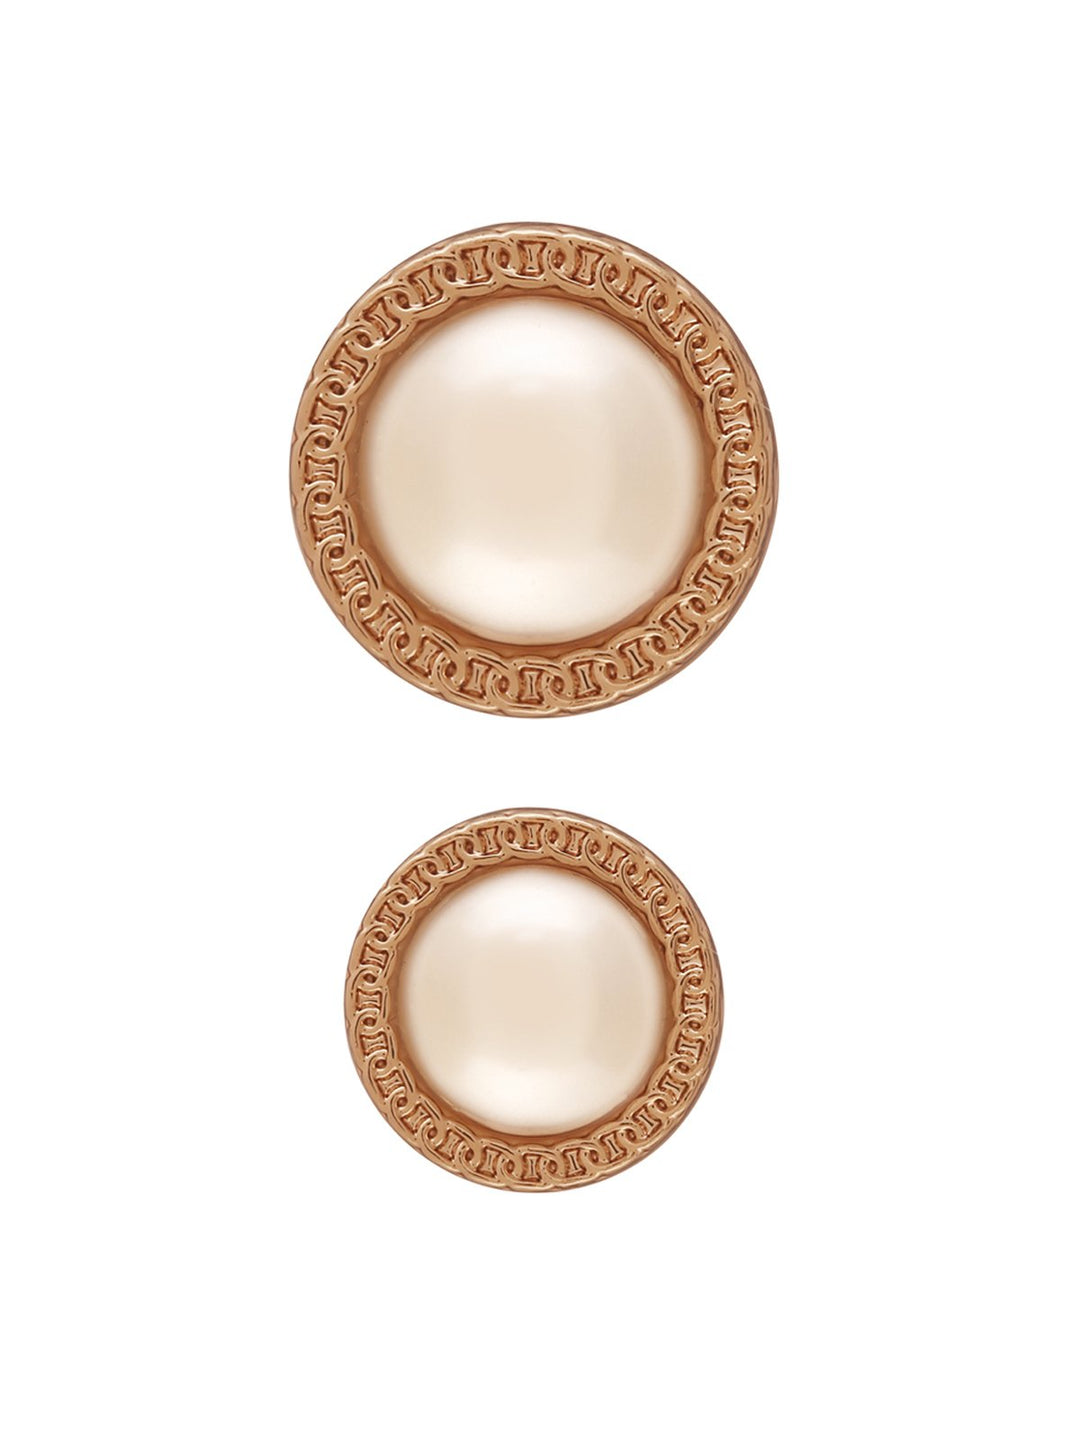 Shiny Round Shape with Chain-Like Design Rim Pearl Button in Golden Color